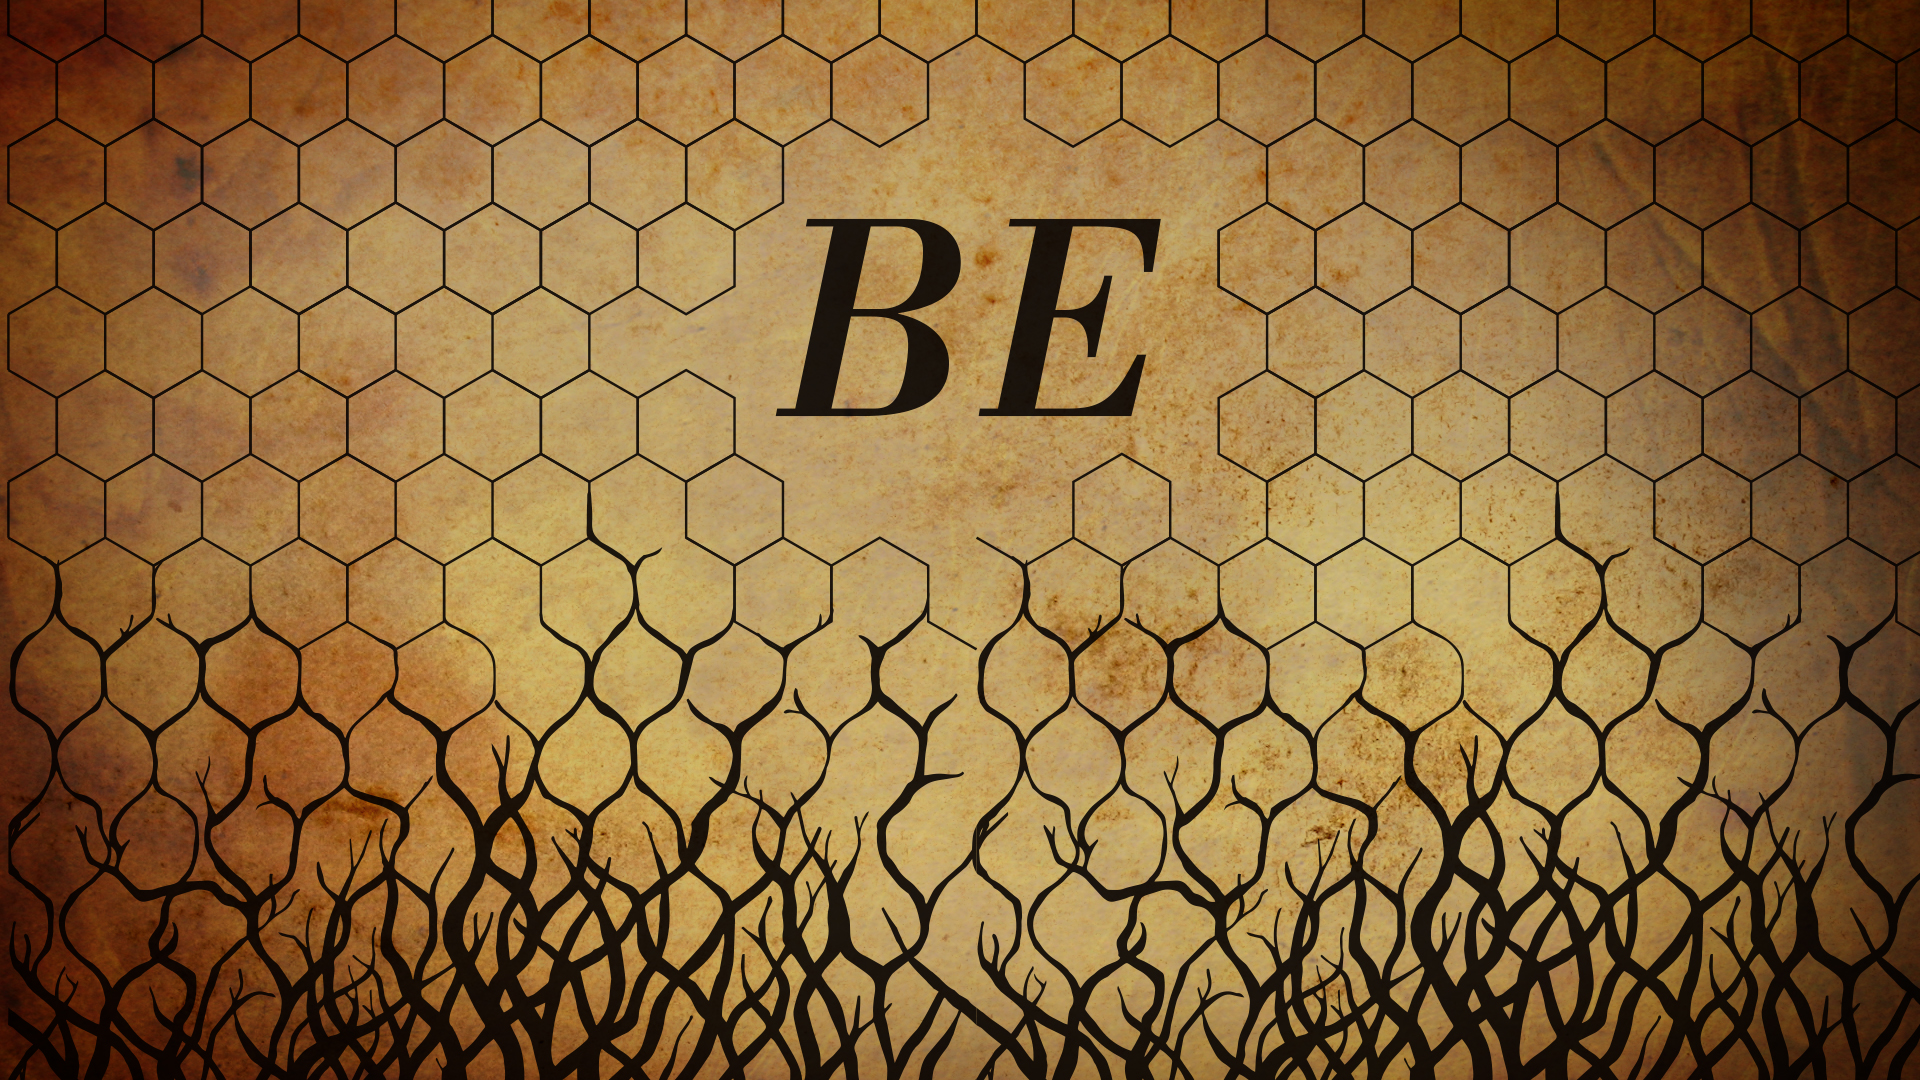  Be